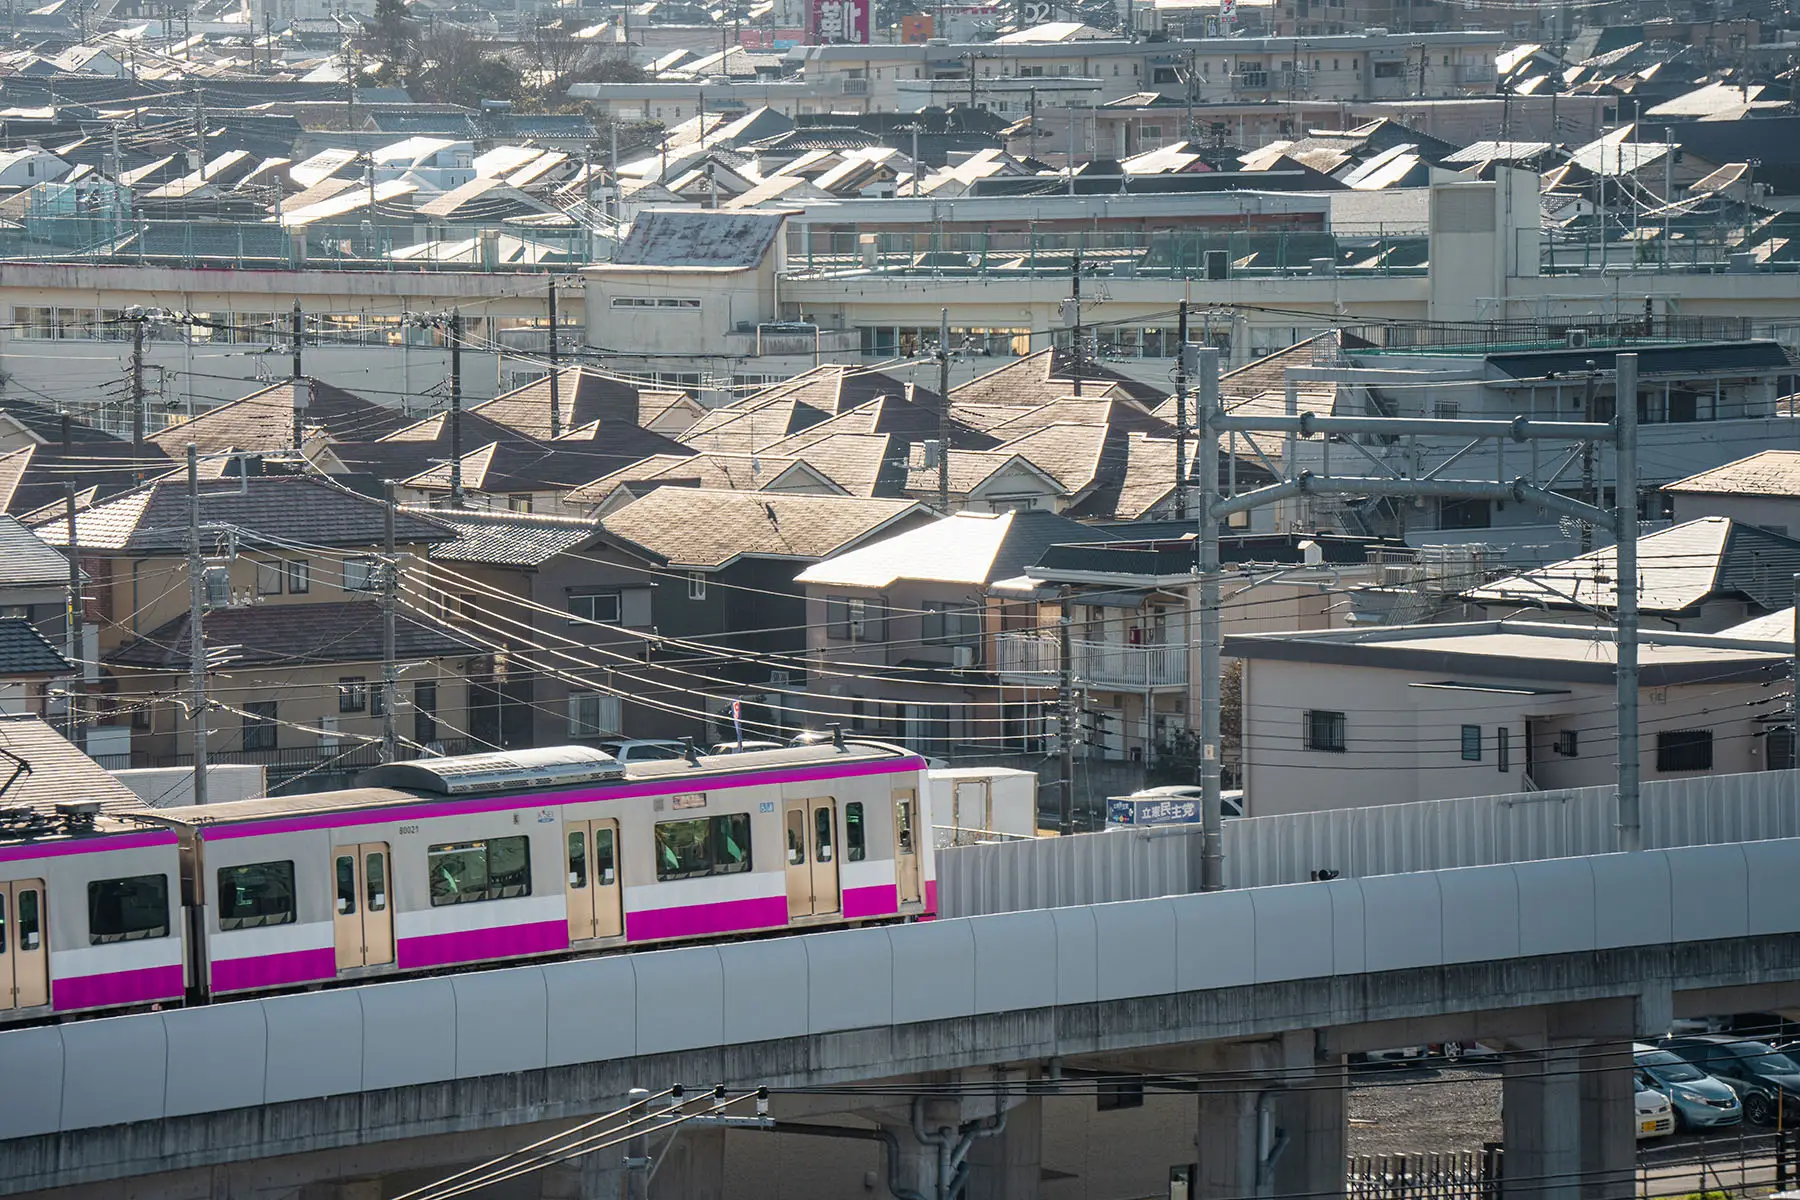 The pink Tokyo metro line riding through a residential area in Tokyo, Japan.